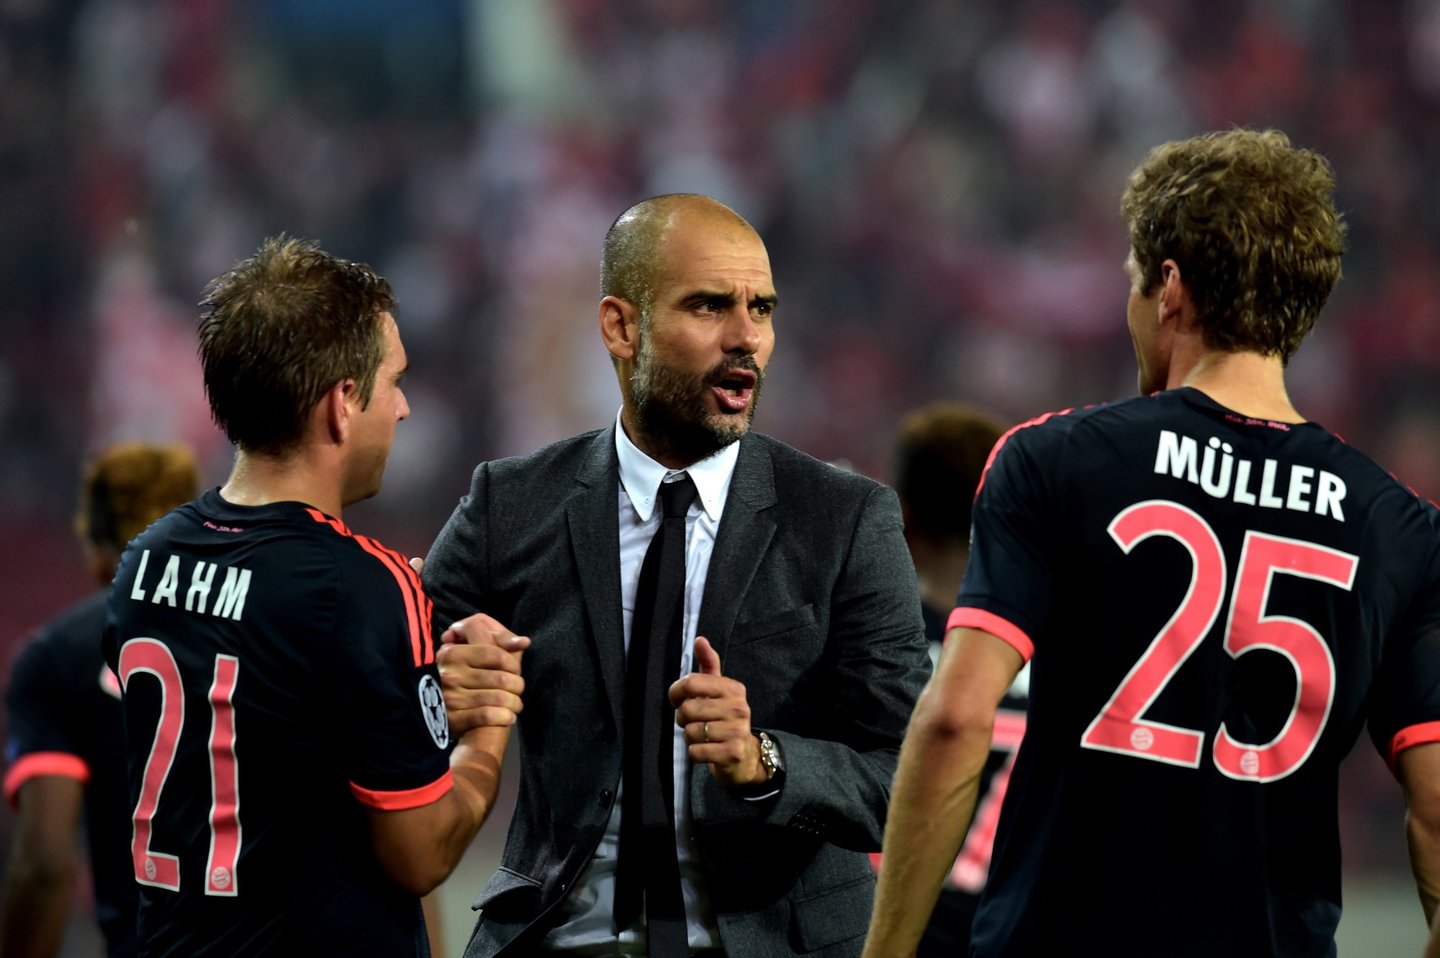 Bayern Munich's Spanish coach Josep Guardiola (C) speaks with Bayern Munich's German forward Thomas Mueller (R) after his team won against Olympiakos during the Group F Champions League football match at the Karaiskaki stadium in Athens on September 16, 2015. AFP PHOTO / ARIS MESSINIS (Photo credit should read ARIS MESSINIS/AFP/Getty Images)